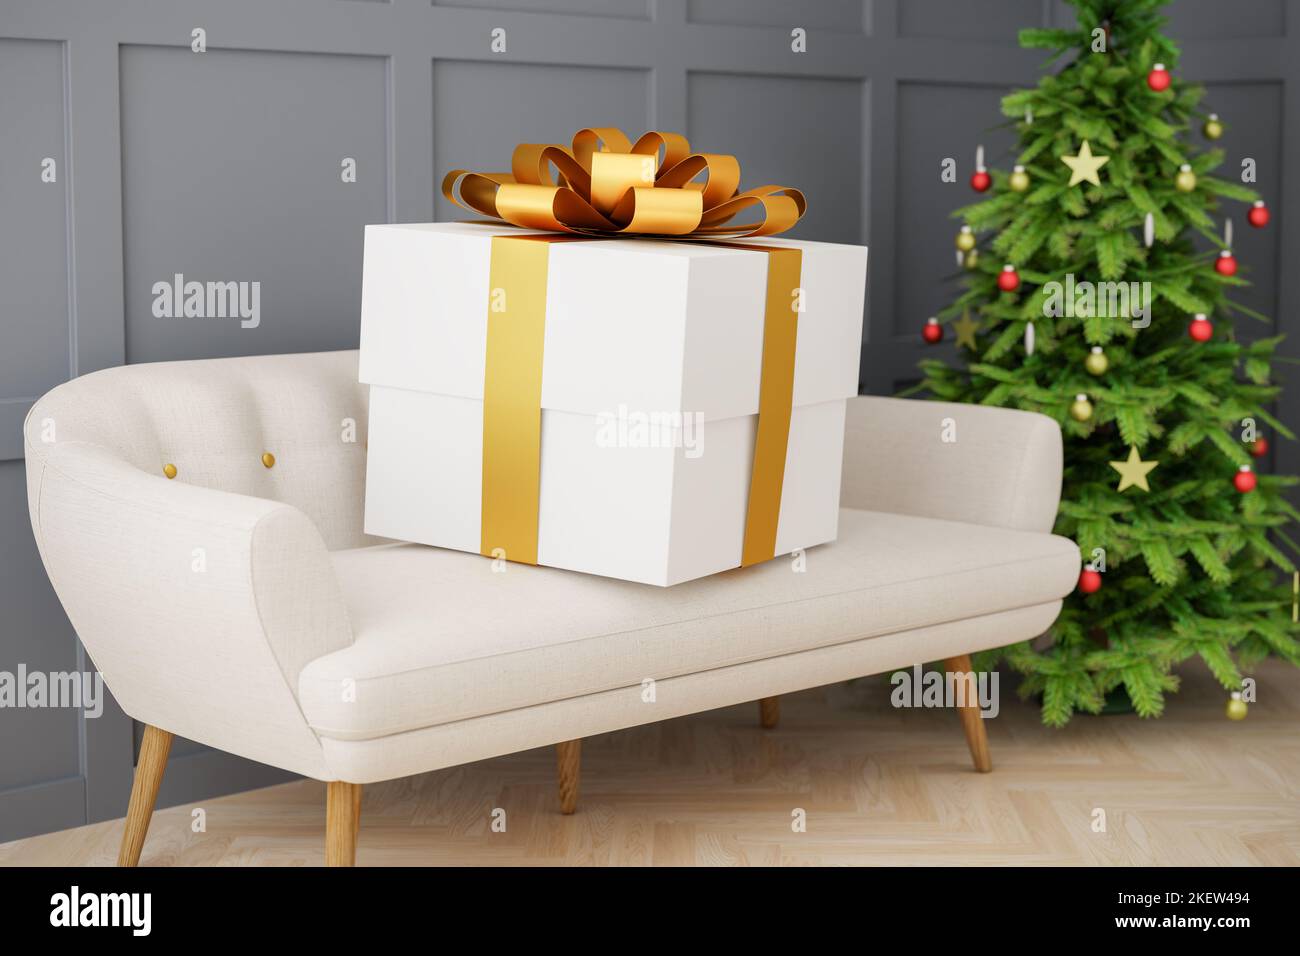 An oversized present box on a sofa. Christmas tree in the back. Shallow depth of field. Concept for excessive giving. Stock Photo